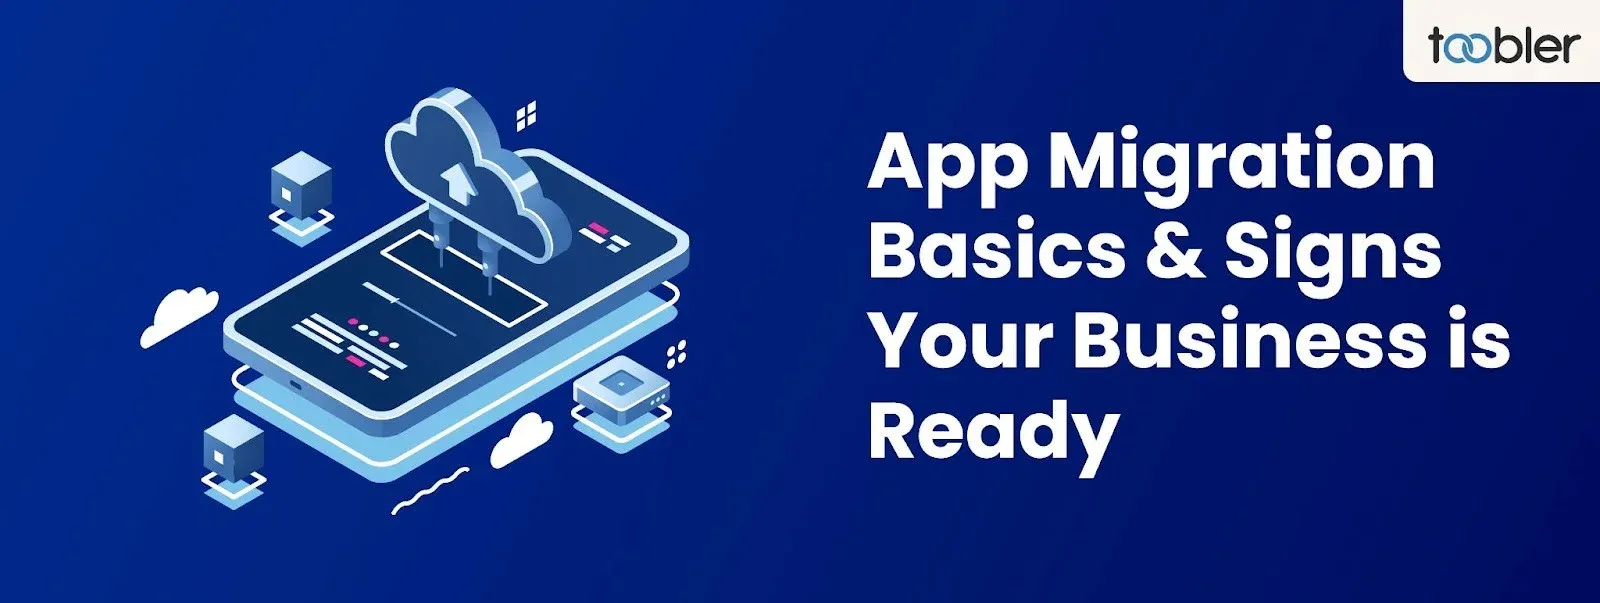 What Is App Migration? How Do You Know You Need It